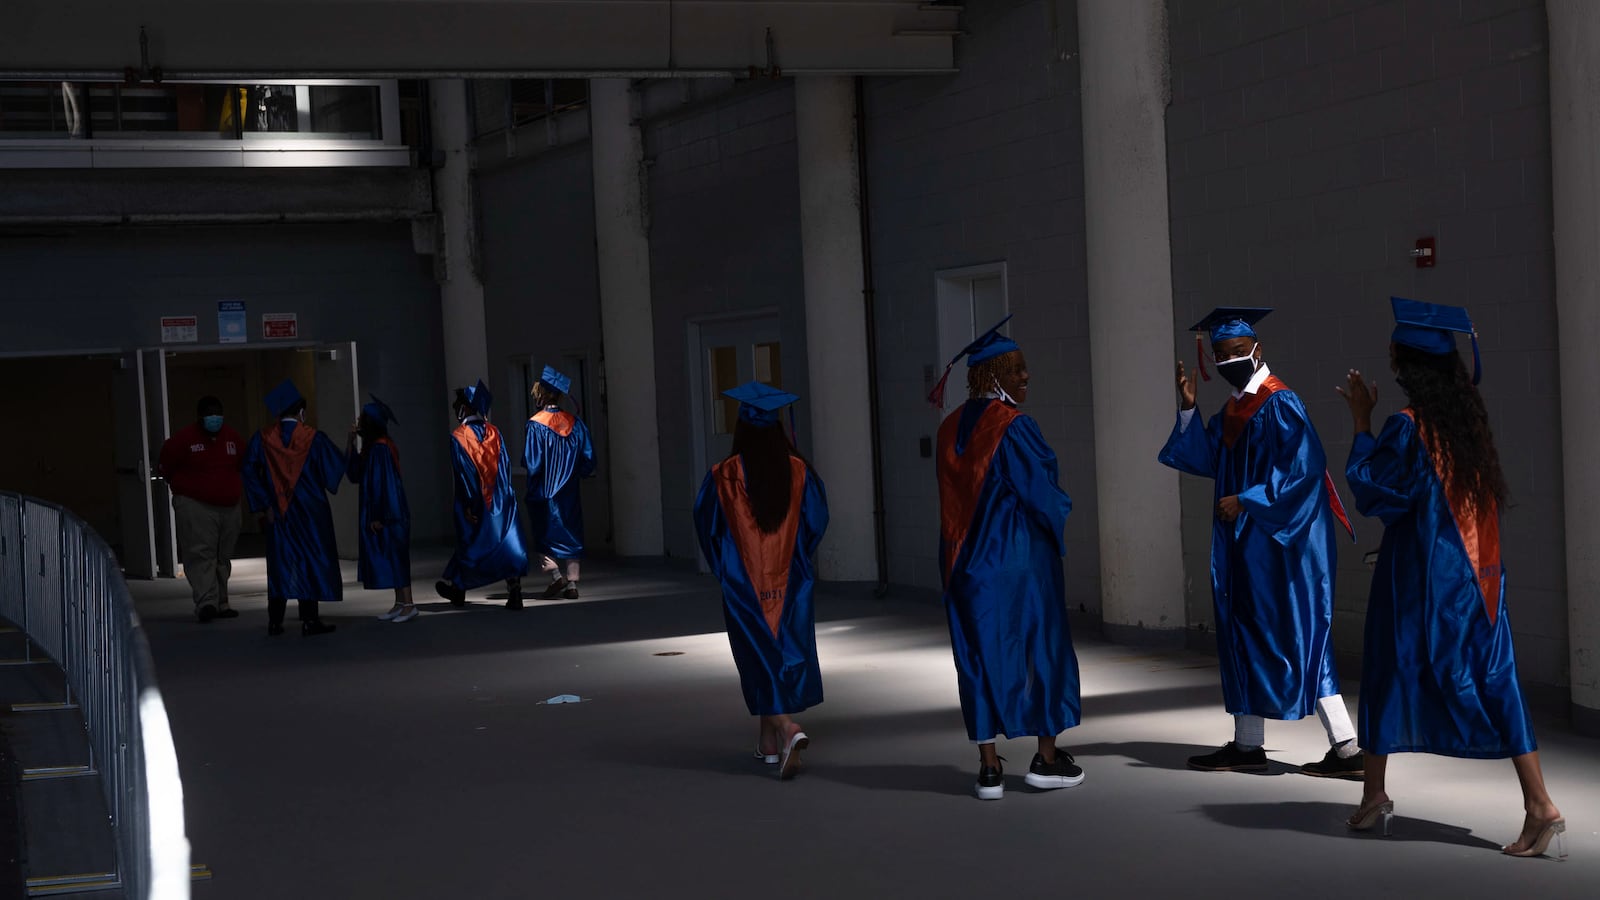 High school seniors in blue and orange caps and gowns walk through the hallway of a stadium to prepare for graduation.